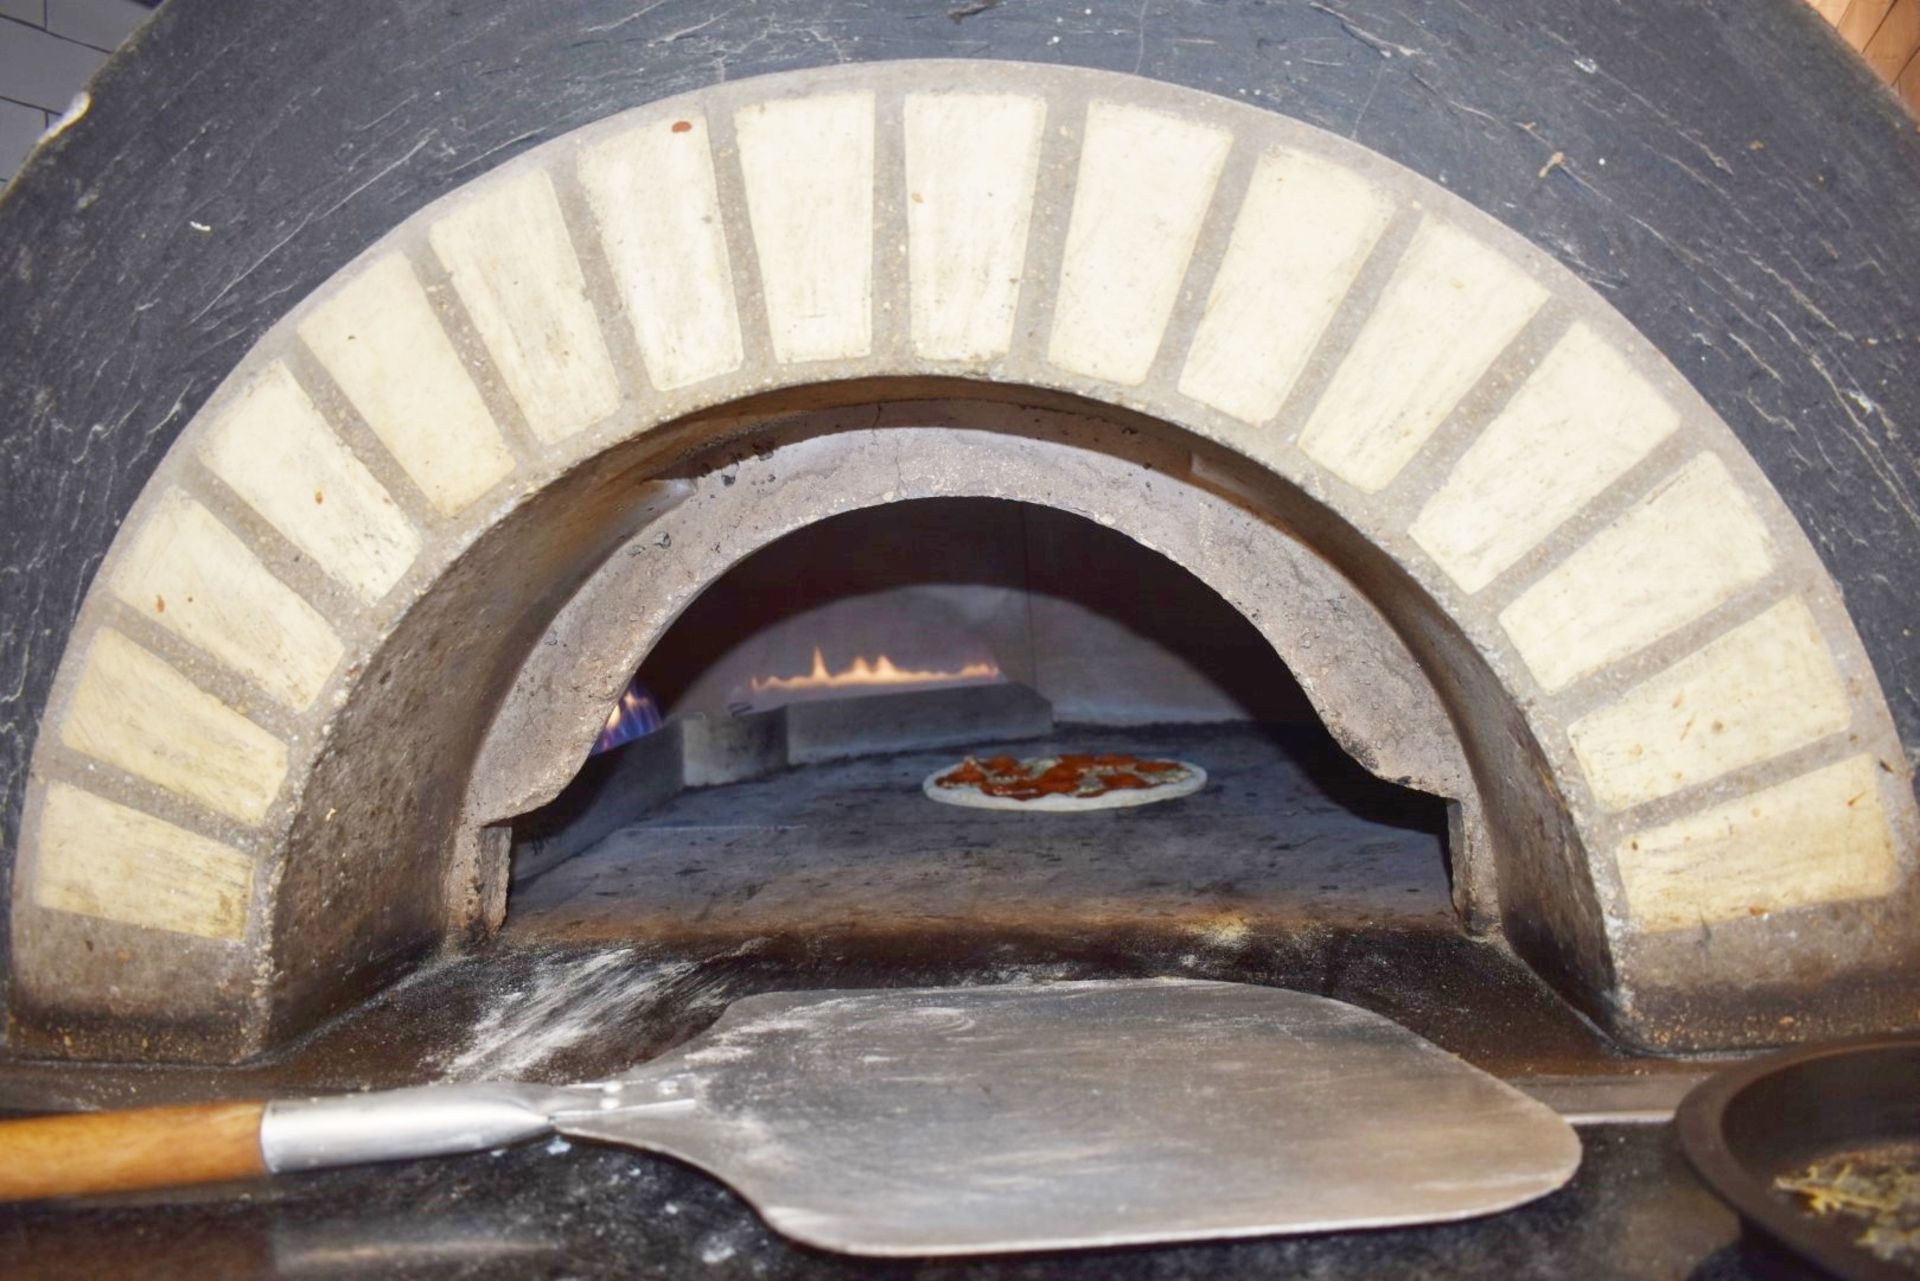 1 x MAM Firedome Commercial Stone Baked Gas Pizza Oven - Made in Italy - Type Modular Fire E - CL499 - Image 2 of 10